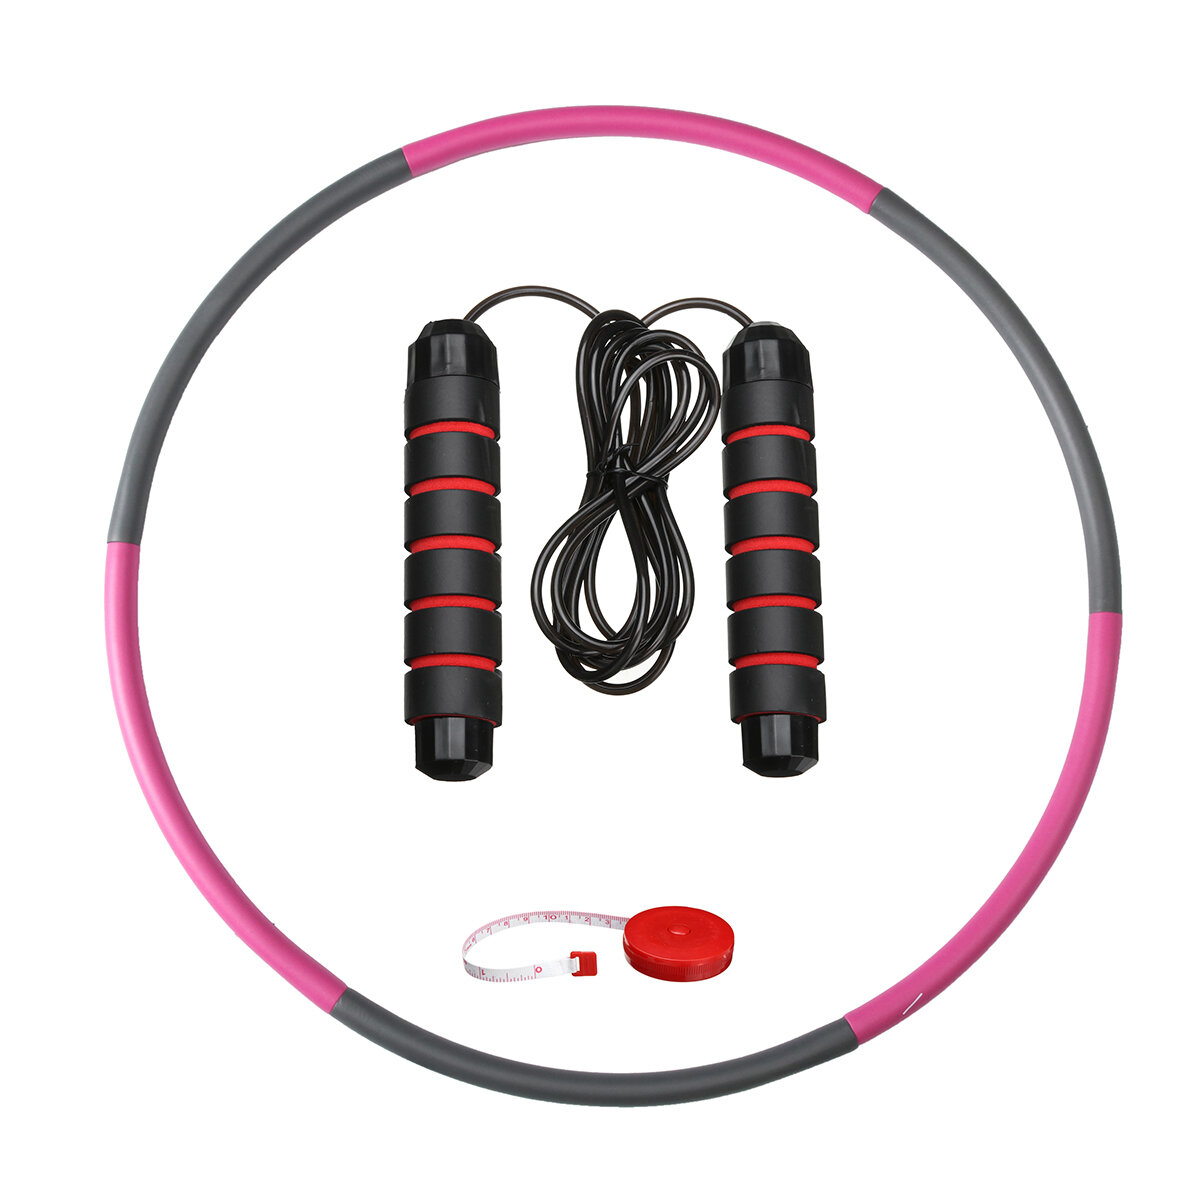 8 Knots Fitness Hoop Removable PE Yoga Waist Exercise Slimming Hoop Fitness Circle Indoor Gym with Tape Measure Jump Rop